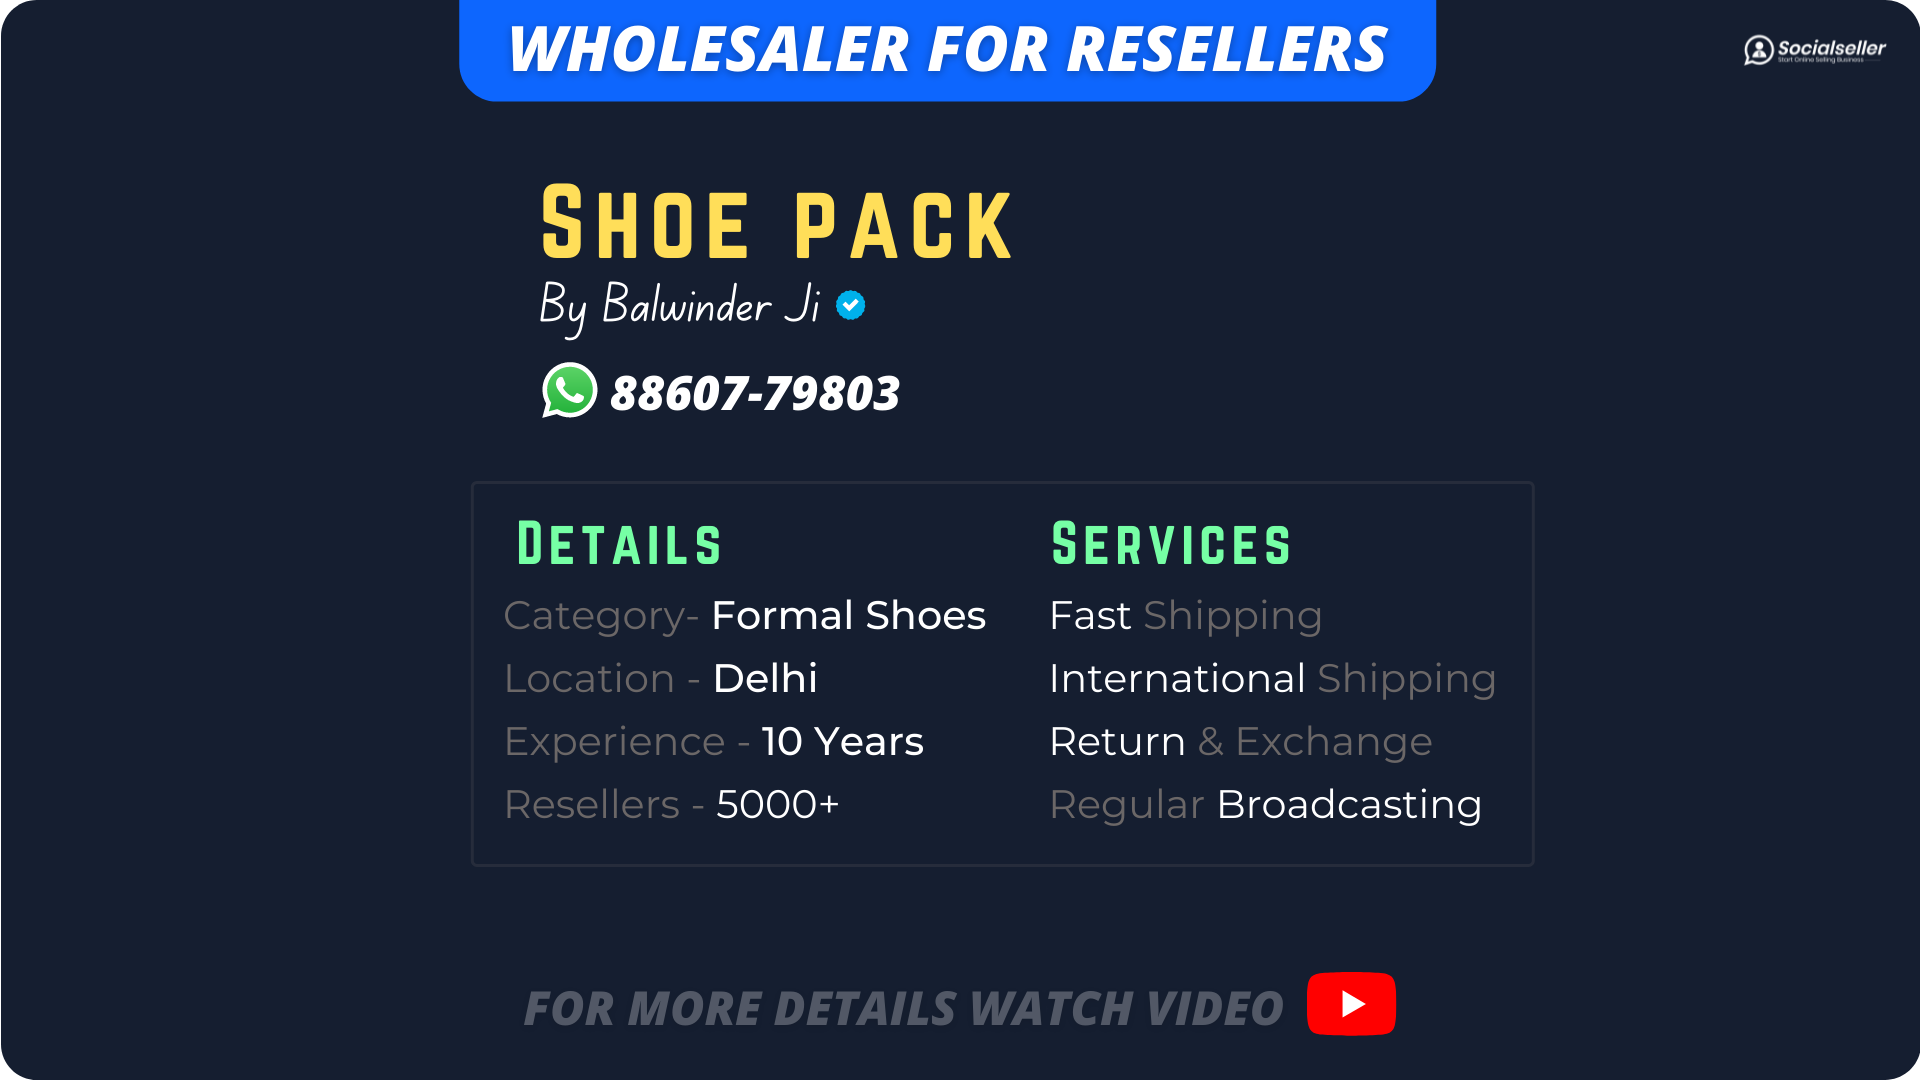 Dropshipping in India